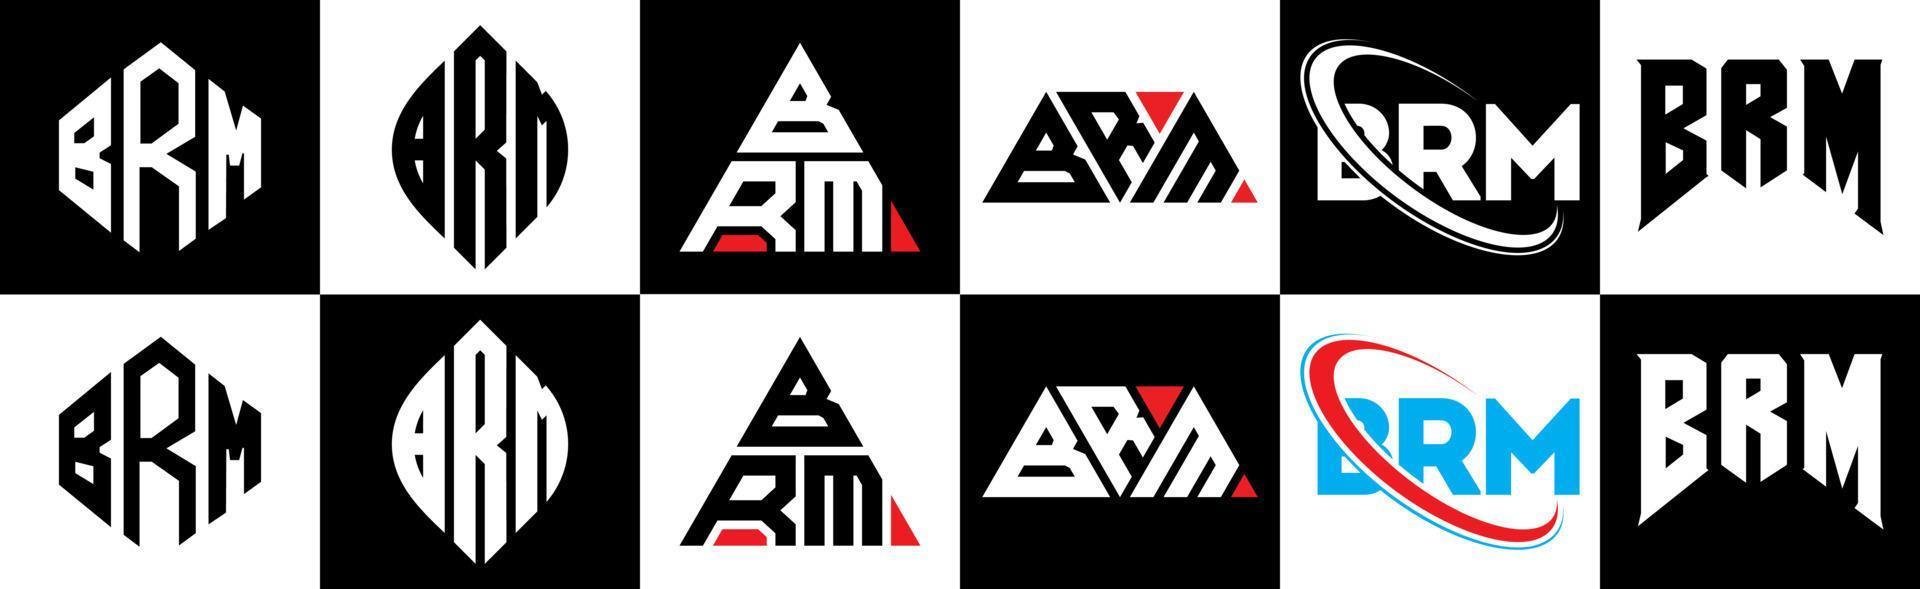 BRM letter logo design in six style. BRM polygon, circle, triangle, hexagon, flat and simple style with black and white color variation letter logo set in one artboard. BRM minimalist and classic logo vector